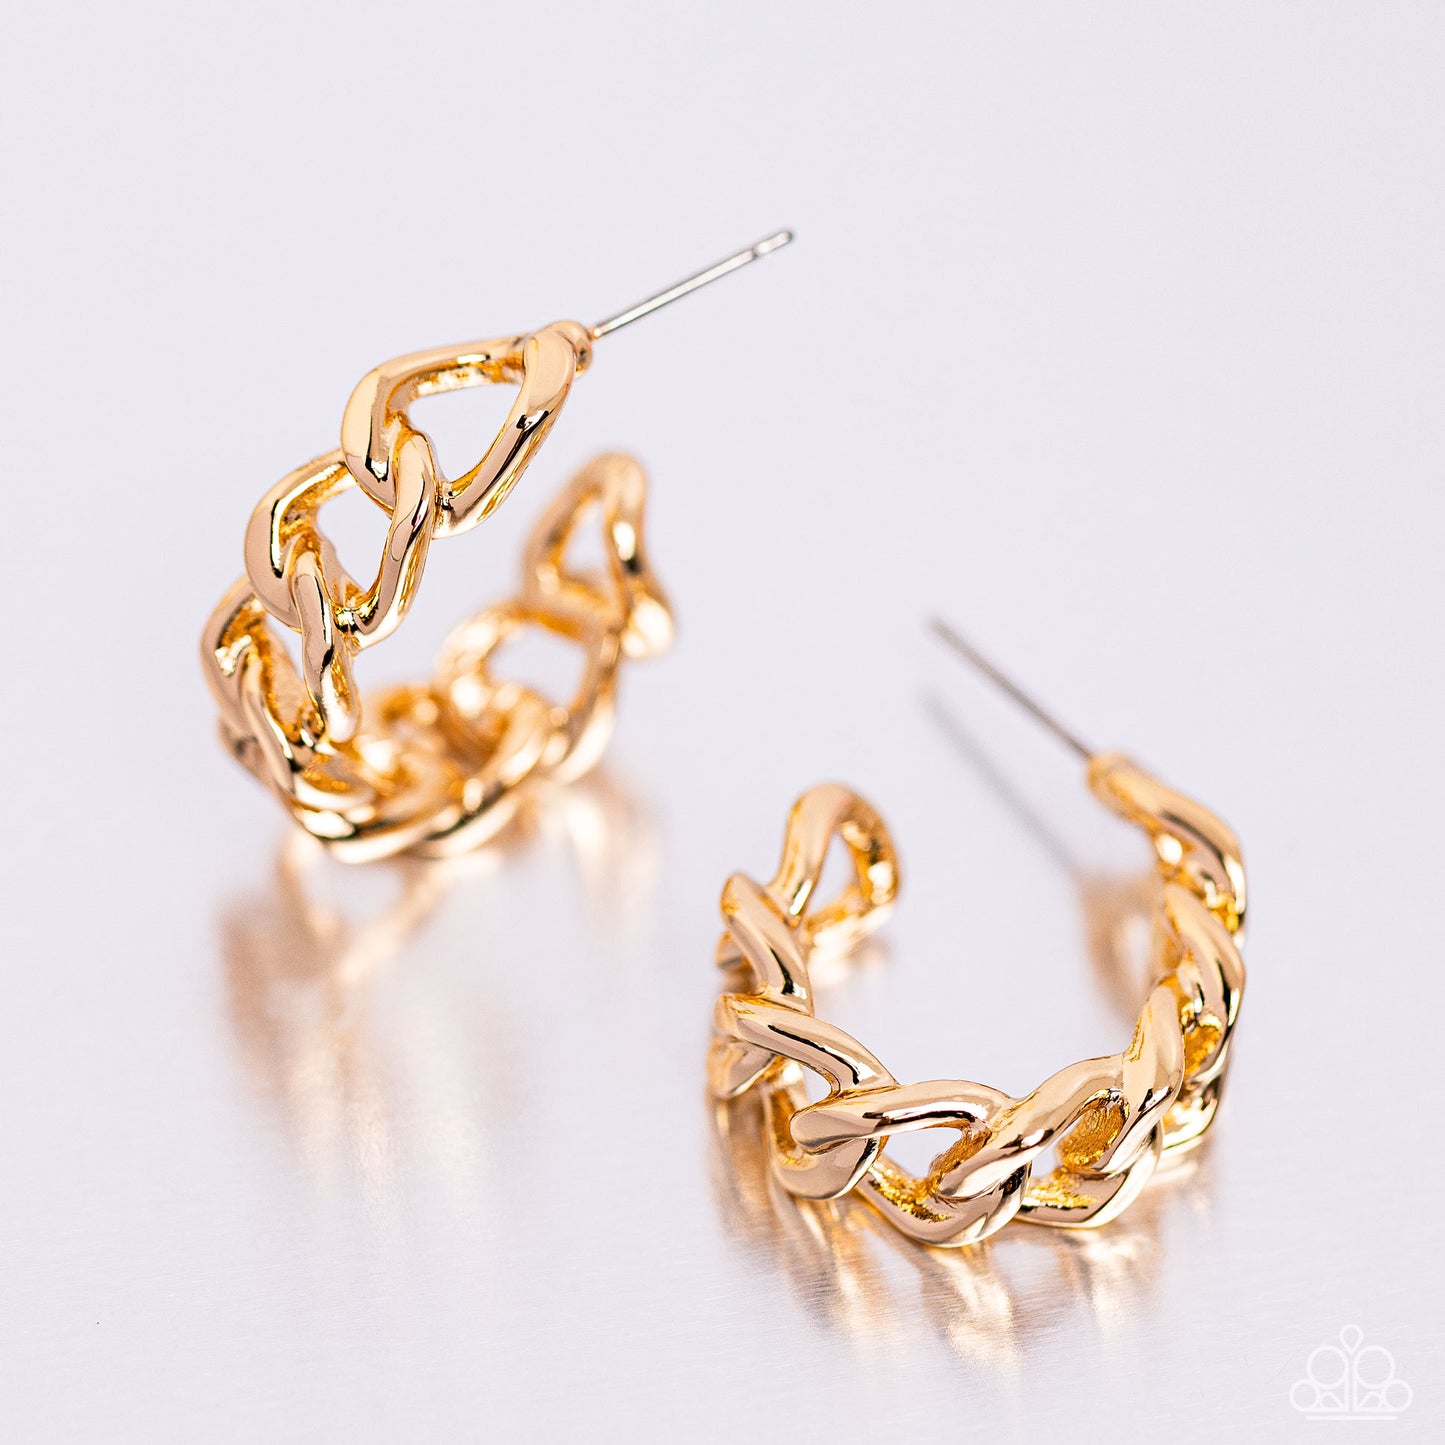 Casual Confidence - Gold Hoop Earring